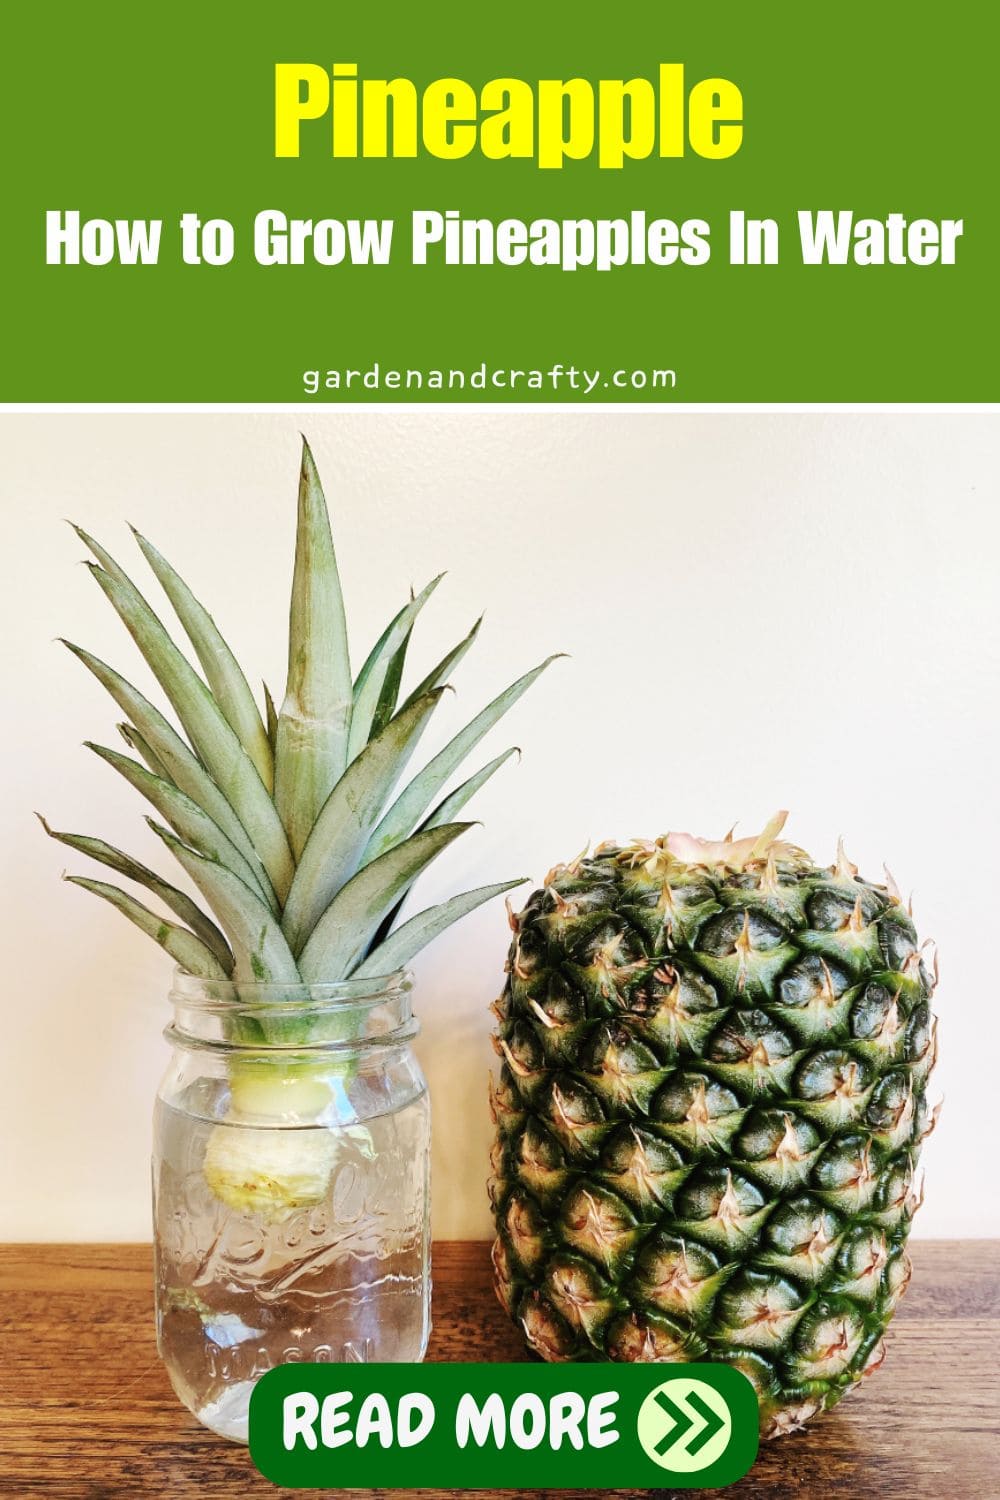 How to Grow Pineapples In Water